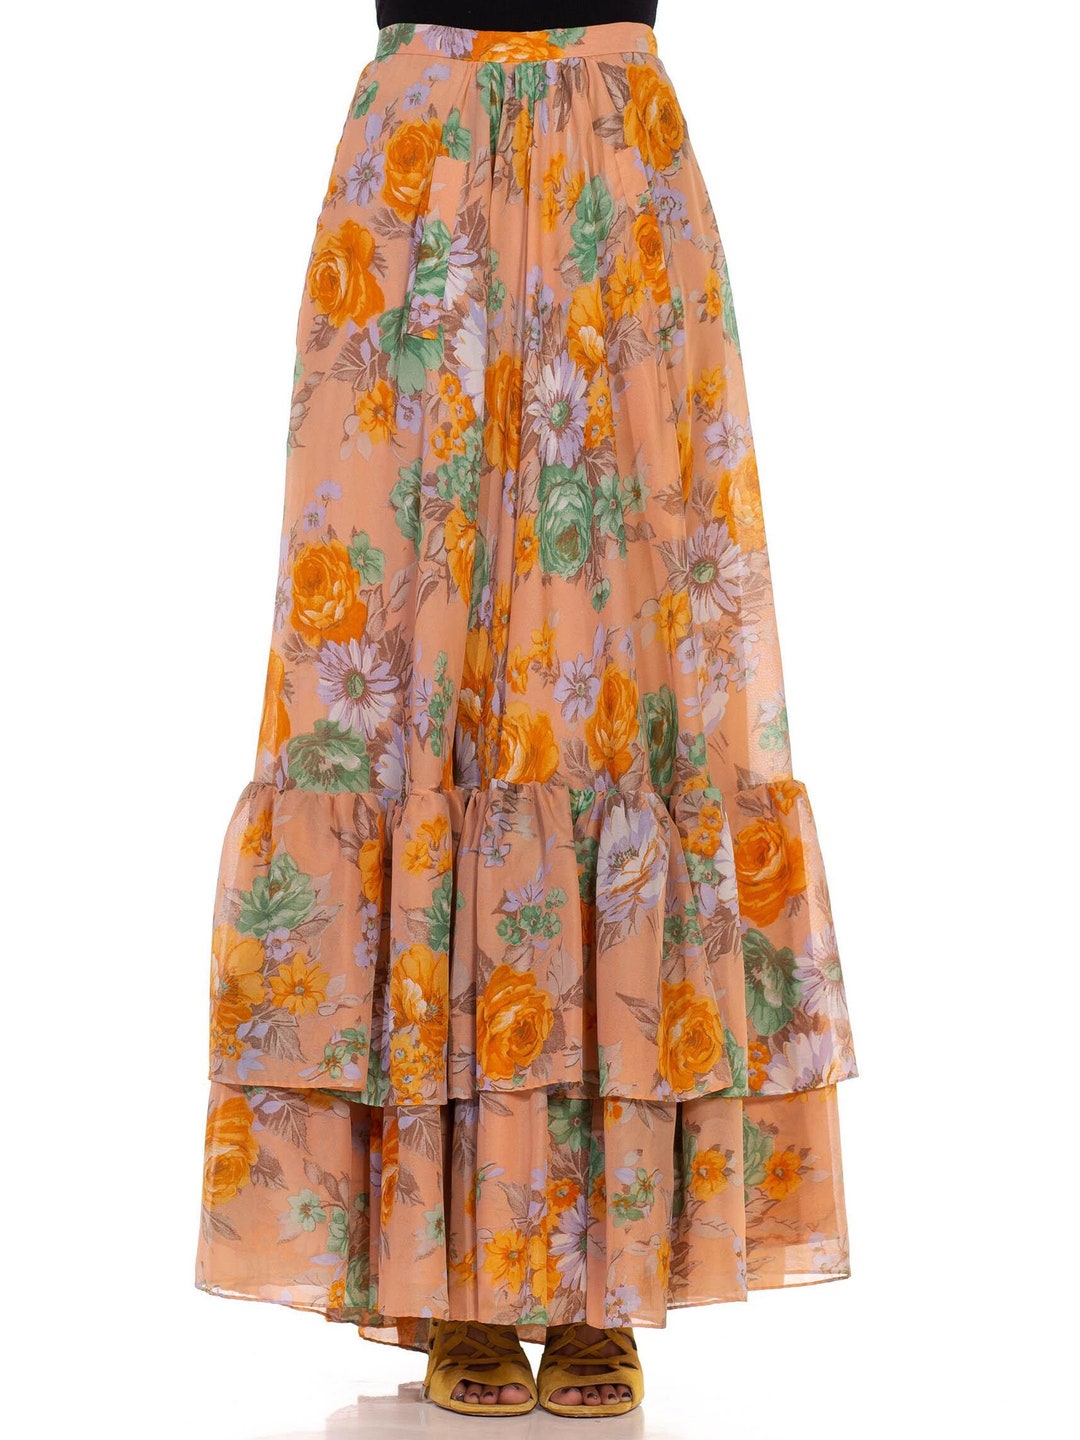 1970S Dusty Pink Orange Green Floral Tiered Ruffle Skirt - Etsy